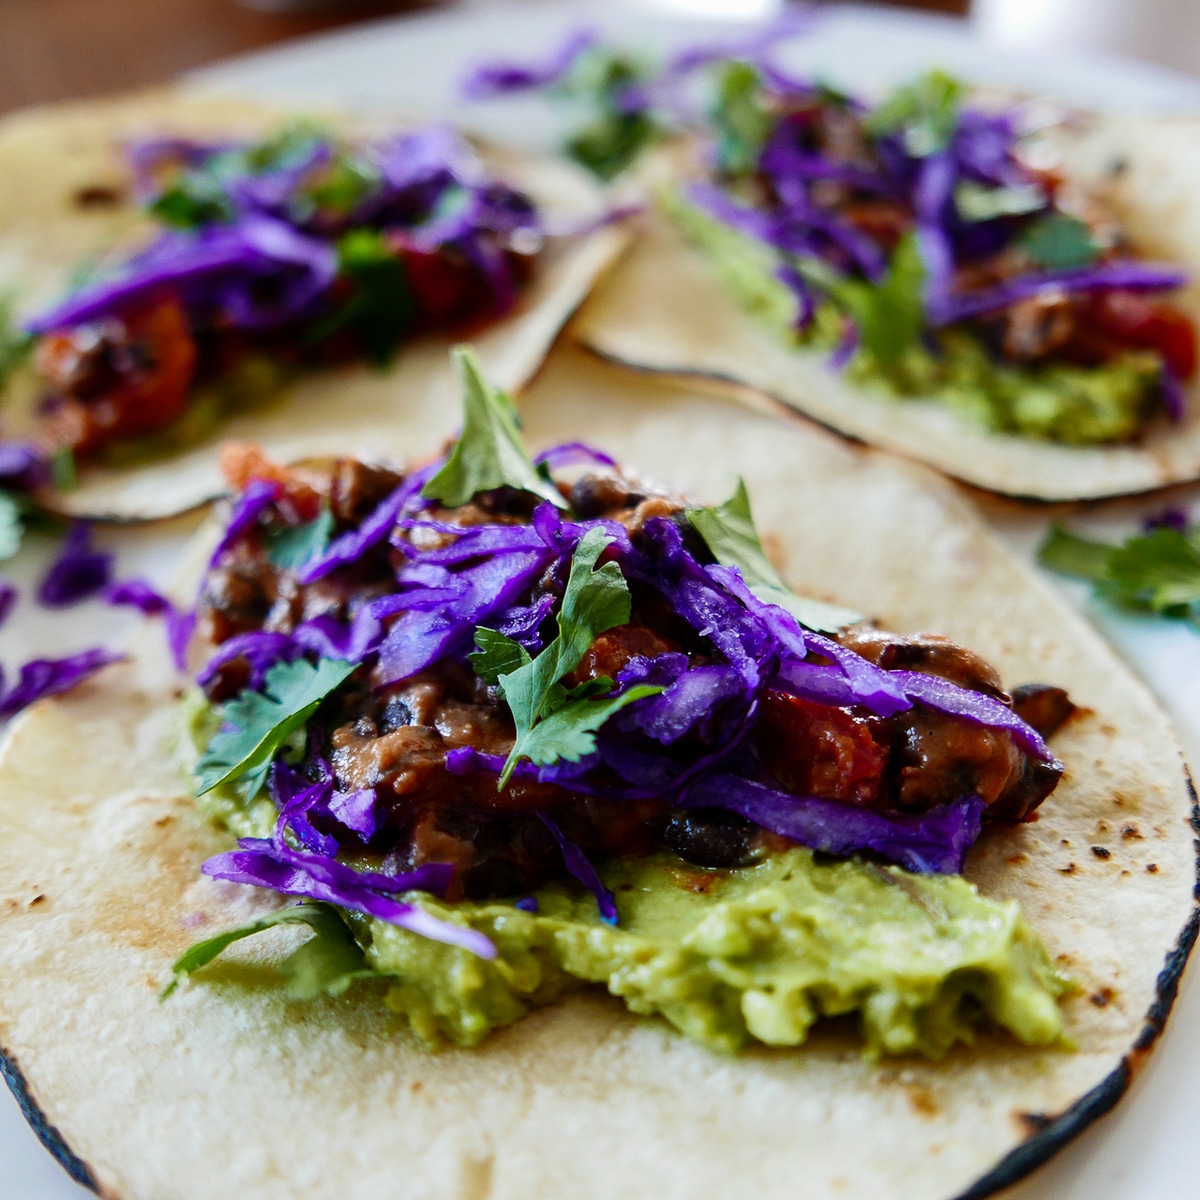 Three tacos on a white plate garnished with cilantro, avocado, and red cabbage.